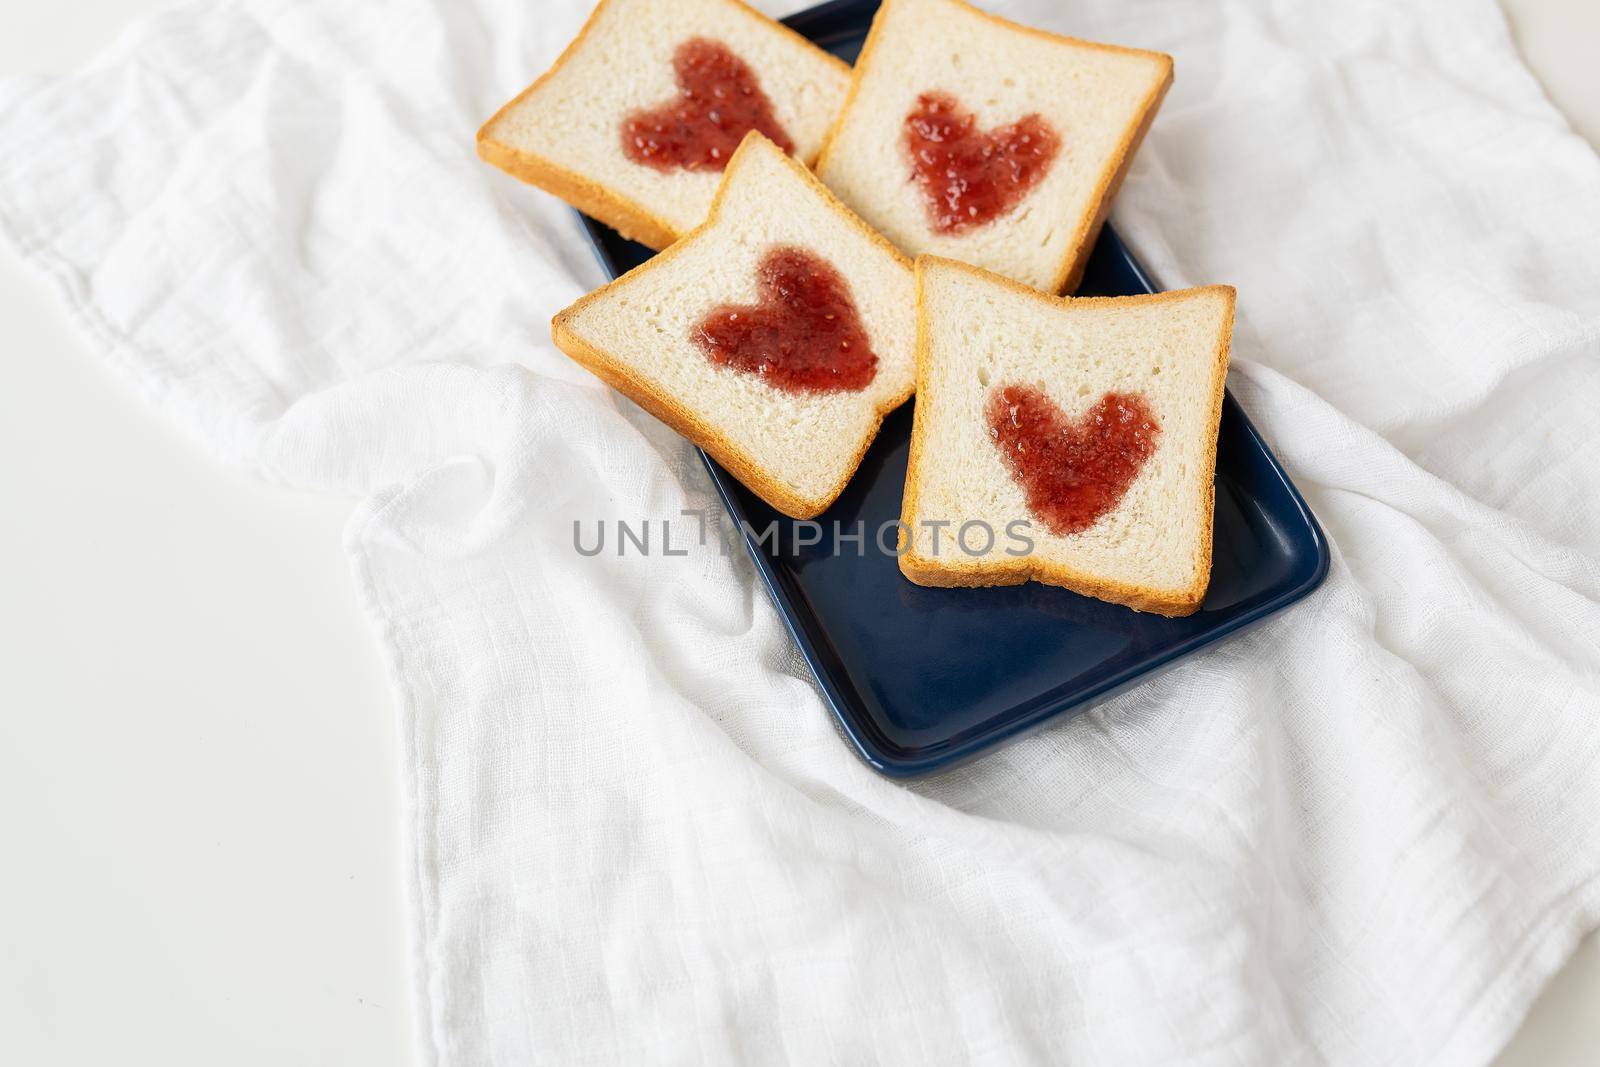 Toast on which the heart is made of jam. Surprise breakfast concept in bed. Romance for St. Valentine's Day, a place for an inscription